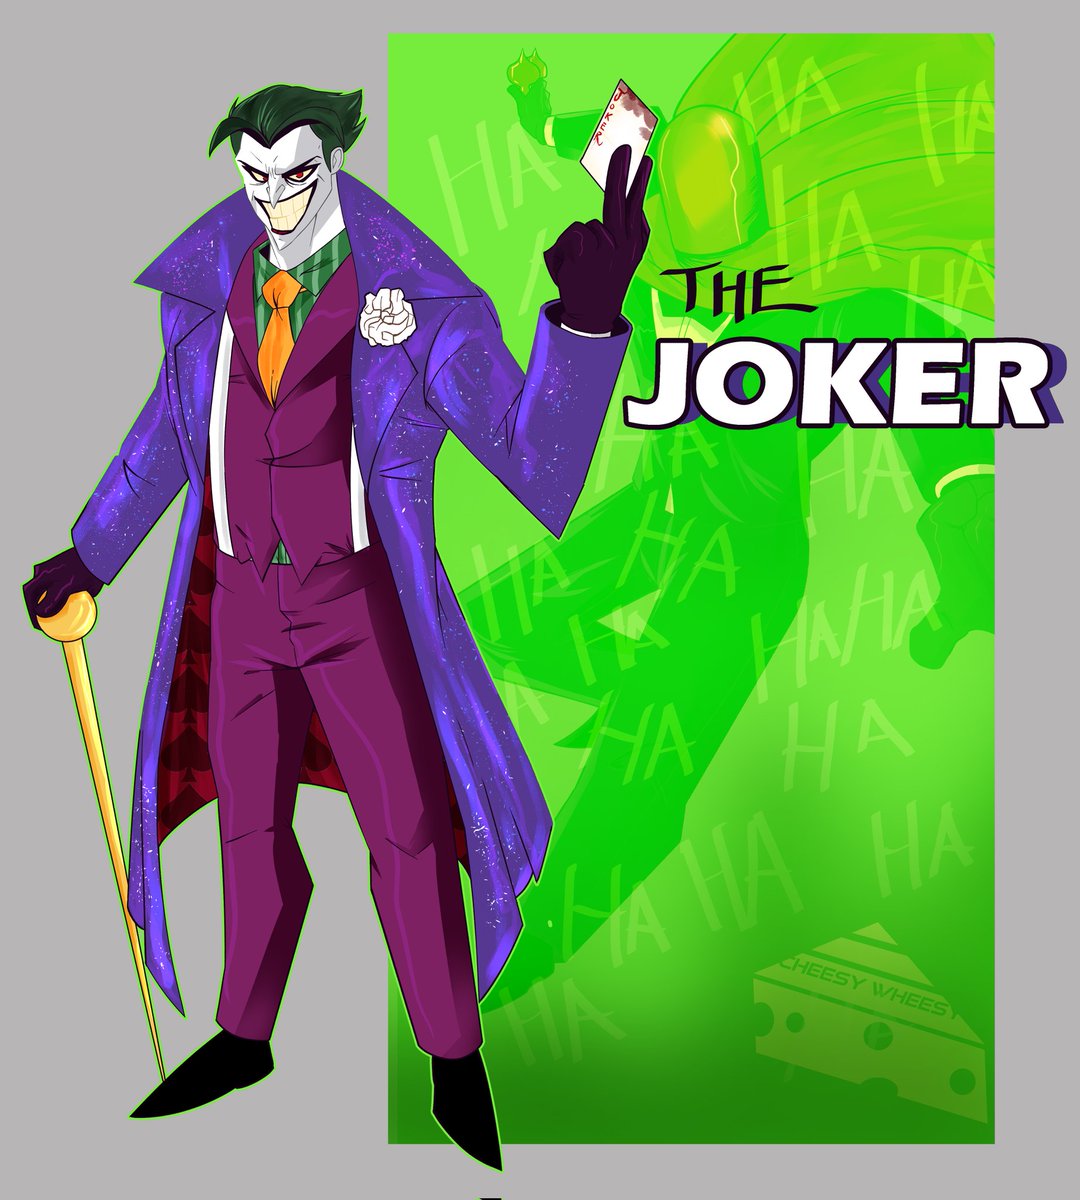 Meanwhile, on Earth 1, our beloved hero Red Hood takes a far darker path, Jack Napier, aka the clown prince of crime: The Joker!

#dccomics #Batman